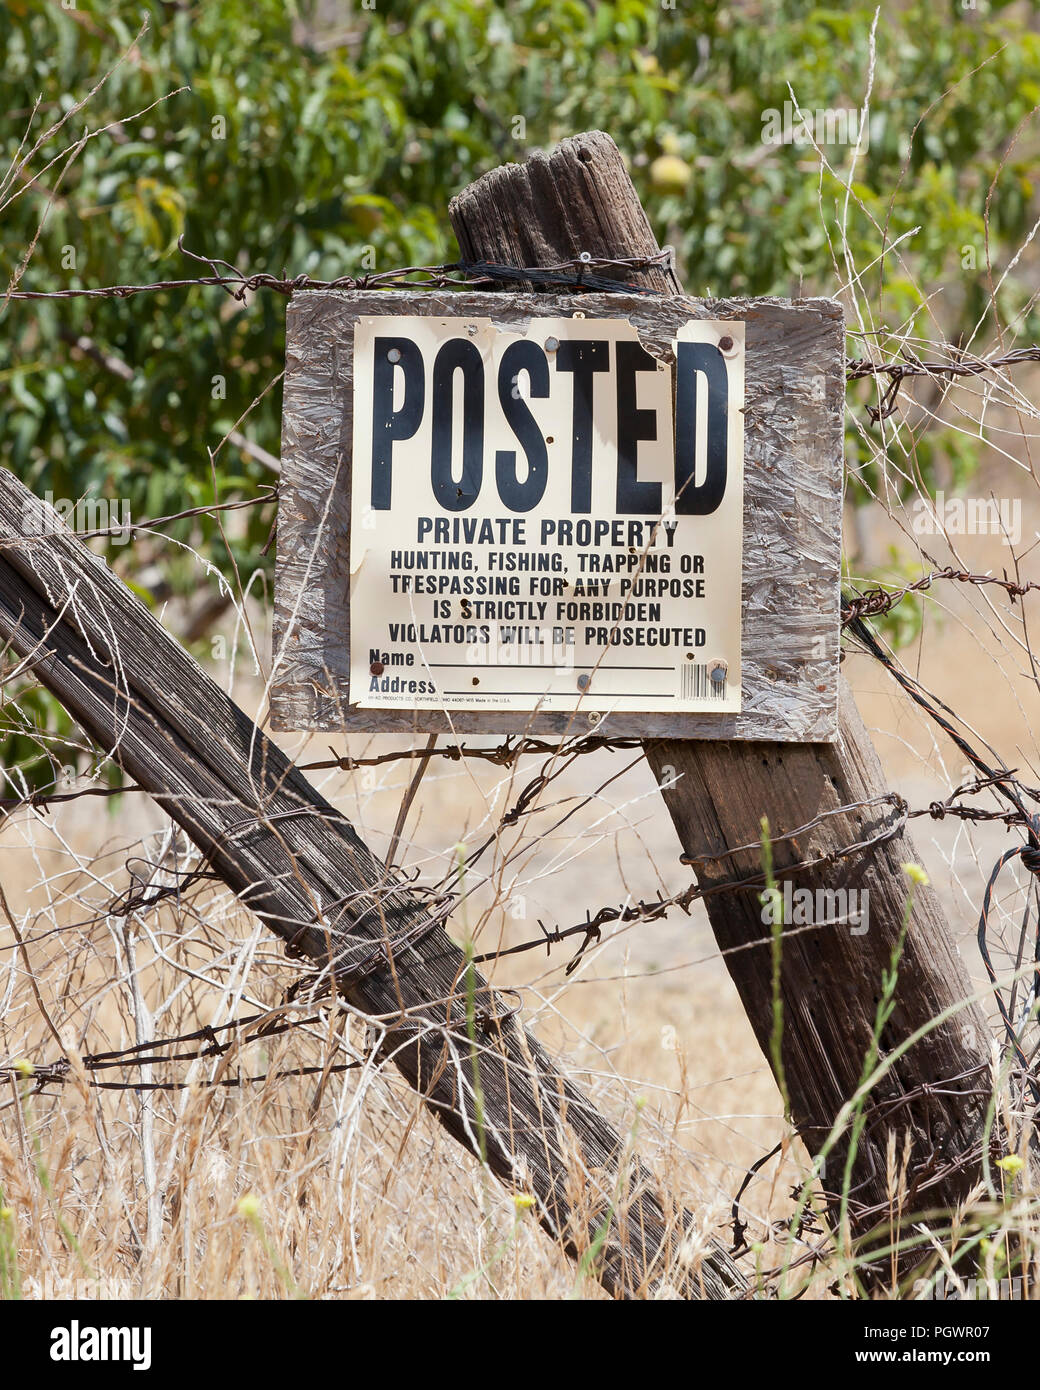 No trespassing, No hunting, No fishing, No trapping sign on fence post on rural private property - California USA Stock Photo